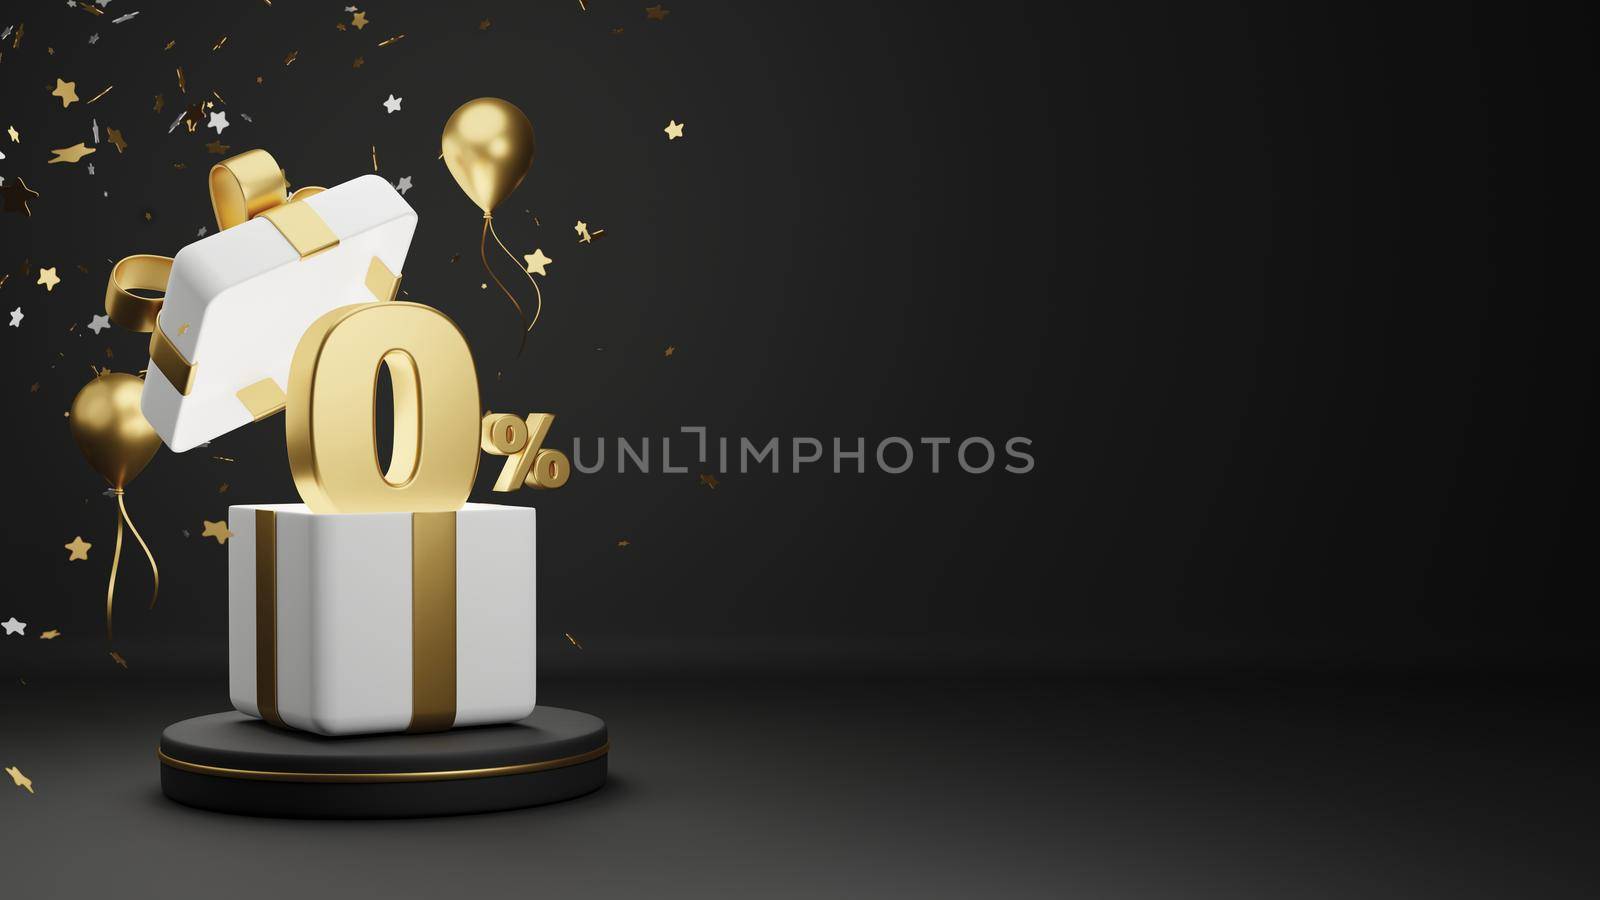 0% or zero percent in the with gift box with gold ribbon on podium and balloon on black background 3D render by Myimagine